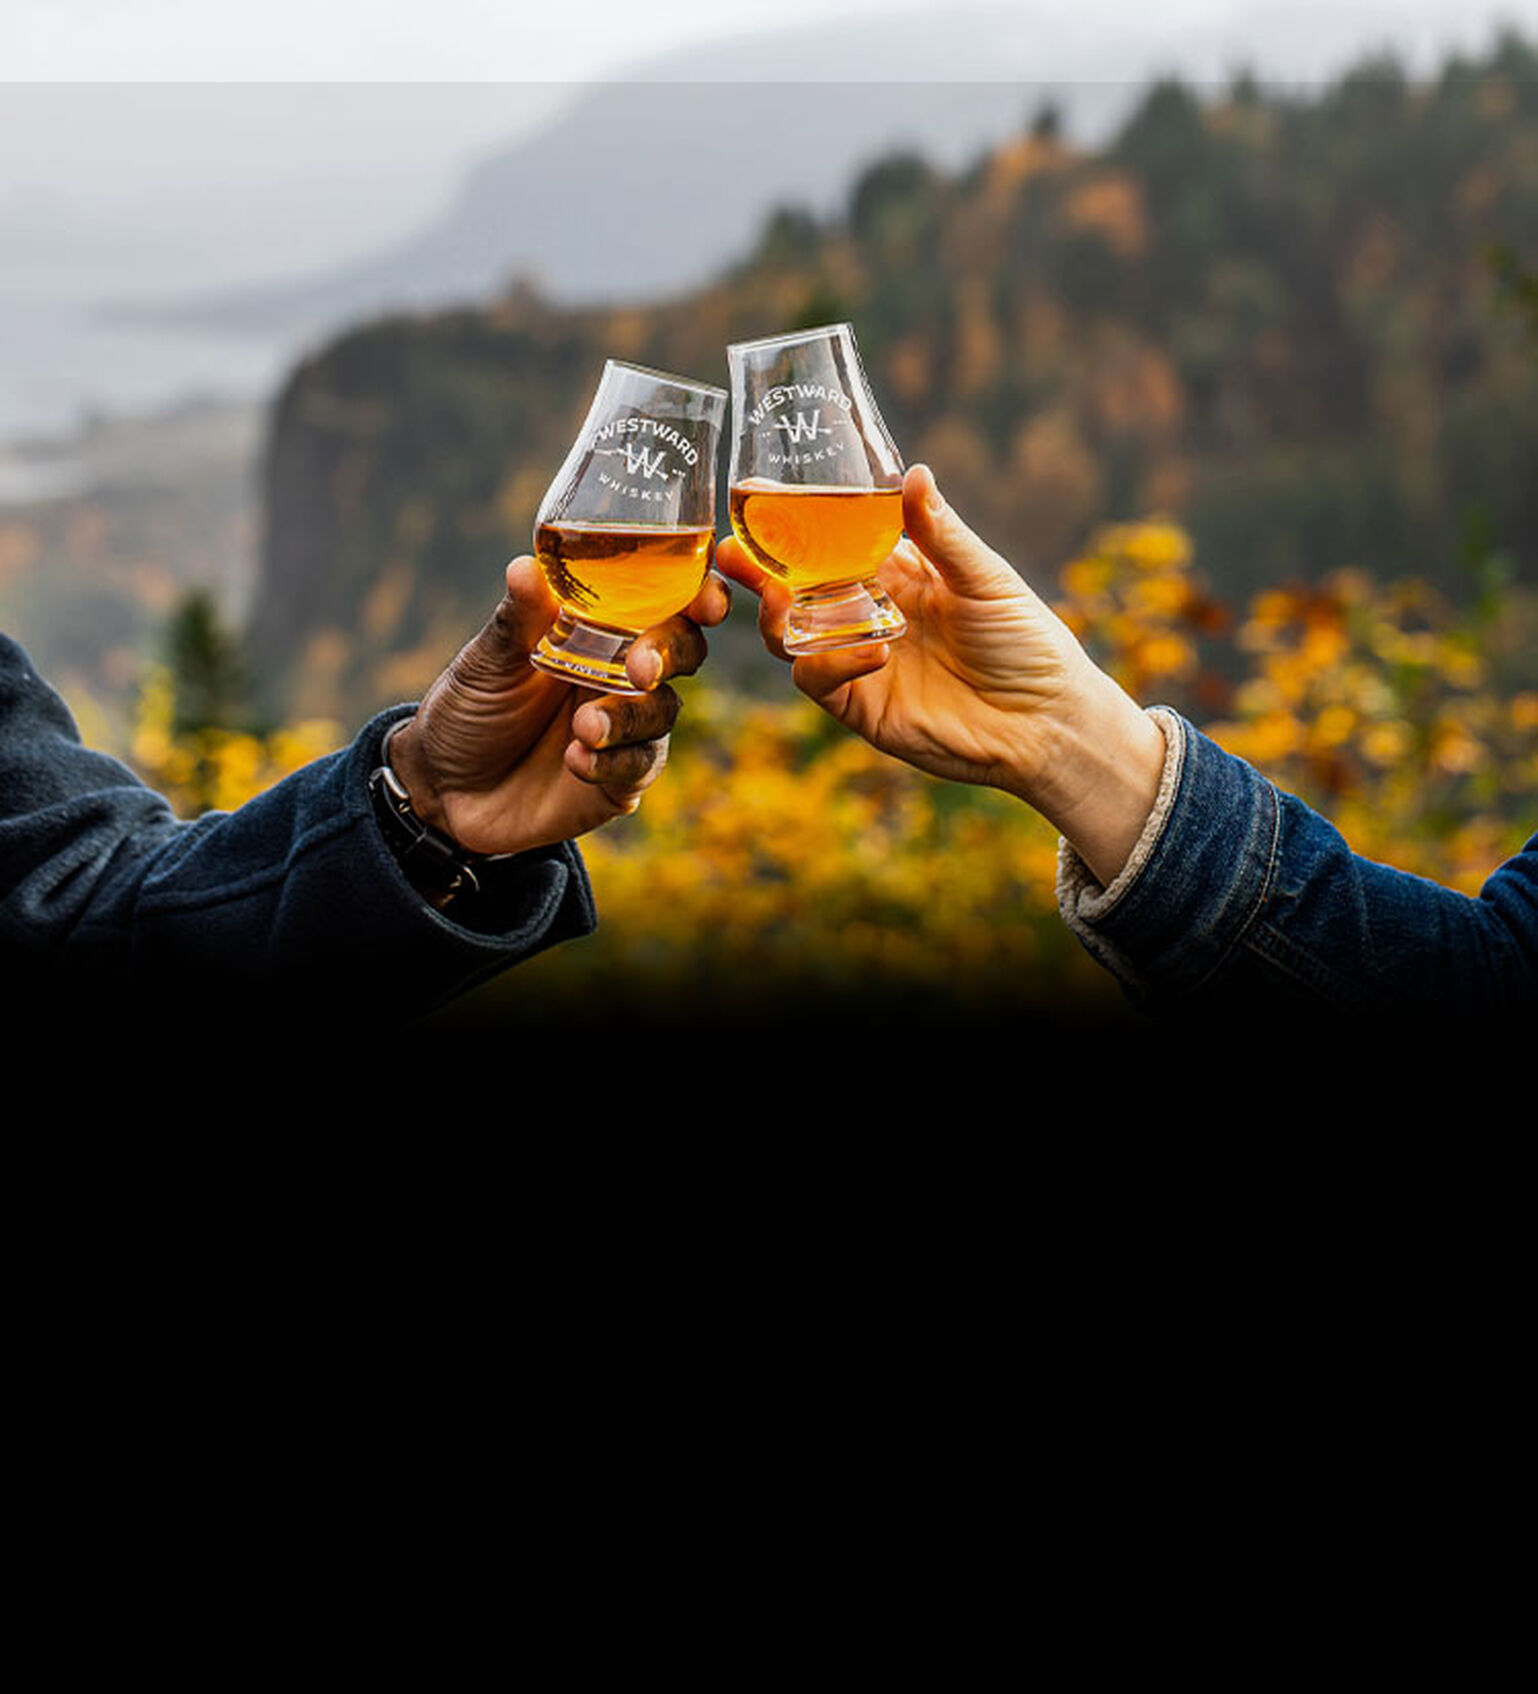 Two people toast a dram of Westward Whisky